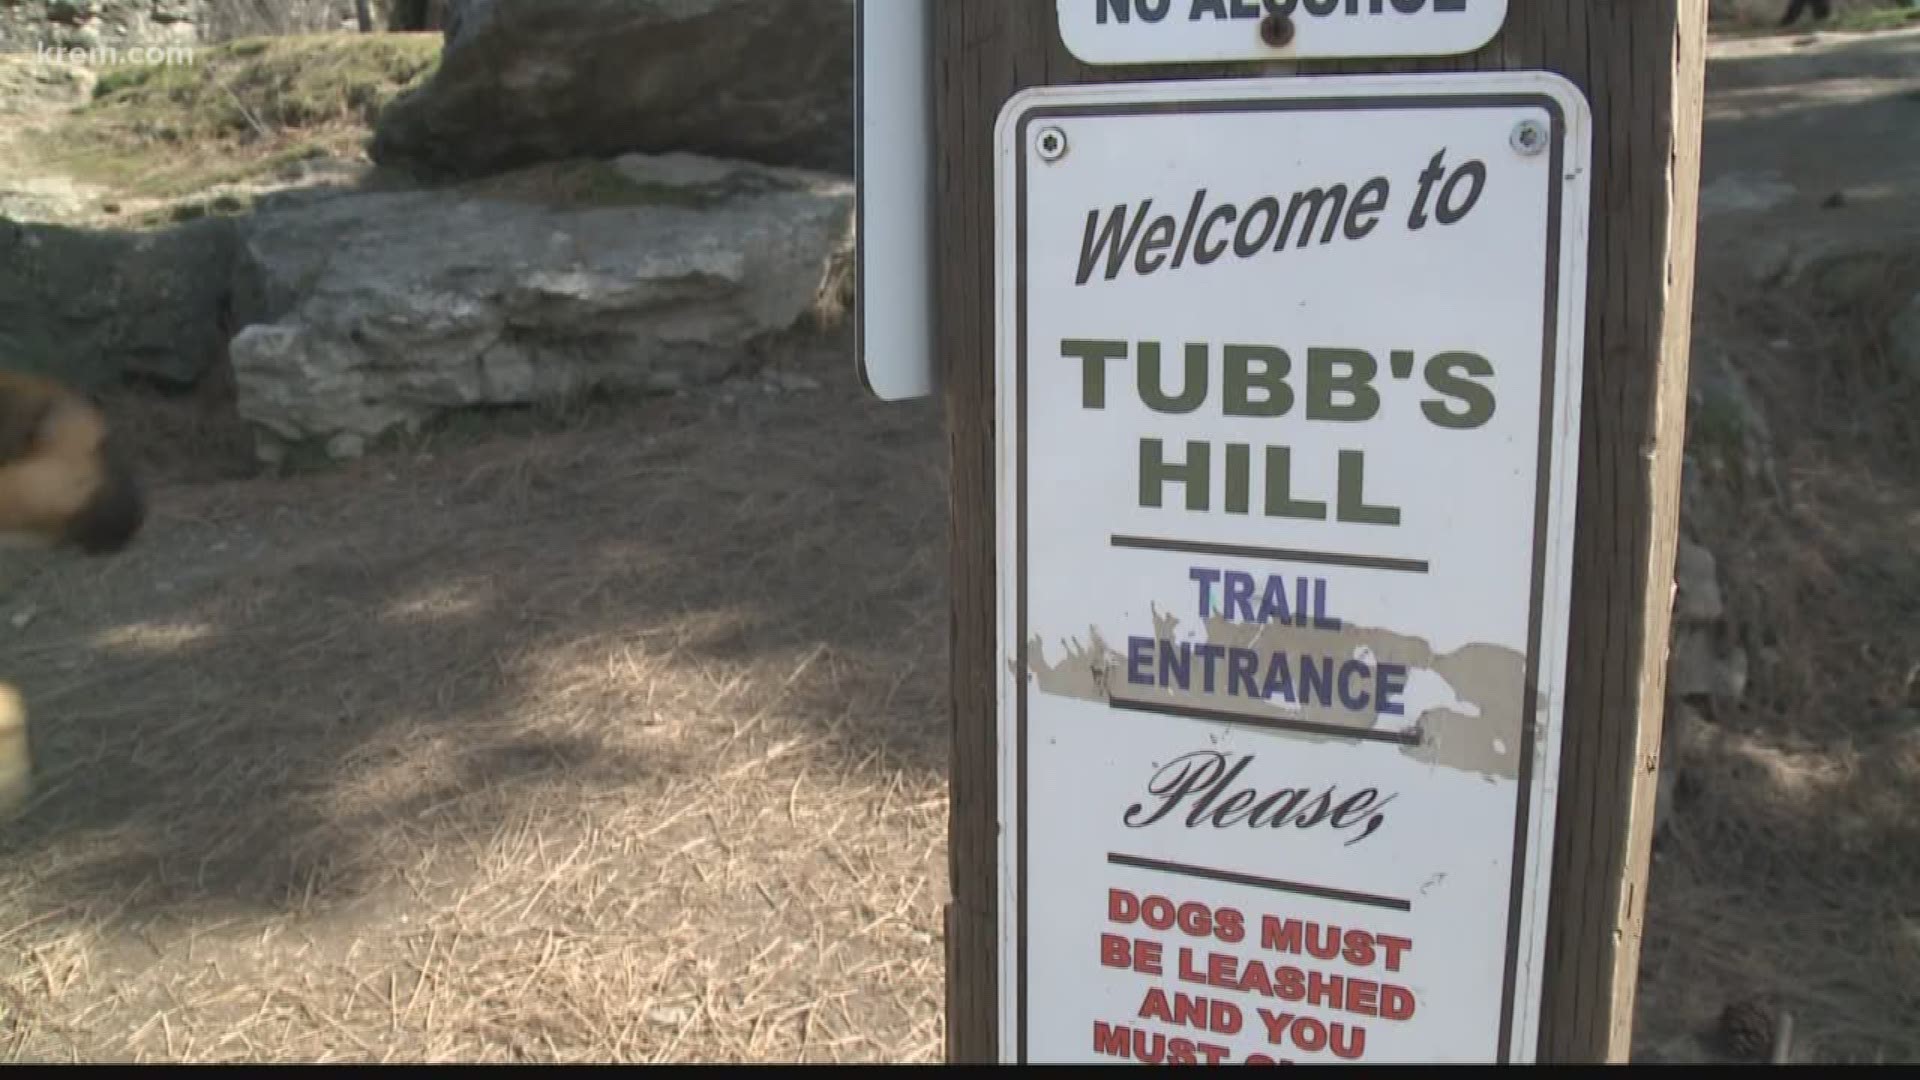 A hiker at Tubbs Hill on Thursday found bones sticking out of the ground, the bones were confirmed to be human.